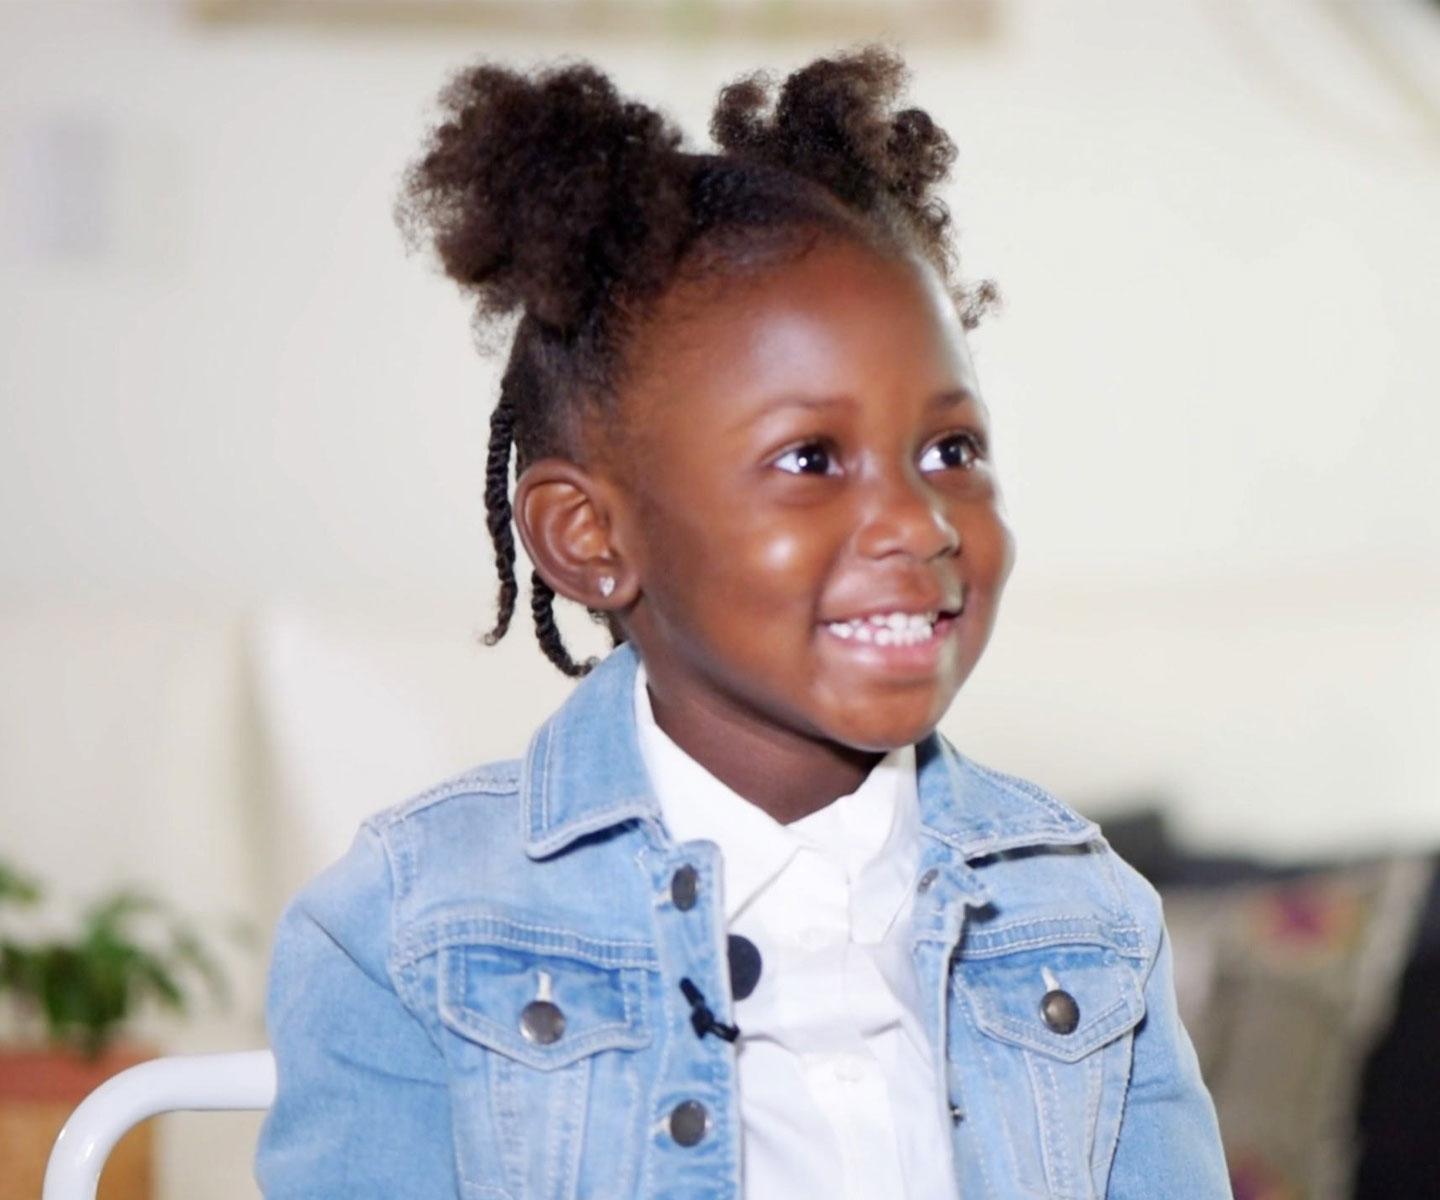 Preschool age girl in a jean jacket, seated indoors, looking off-camera and smiling broadly